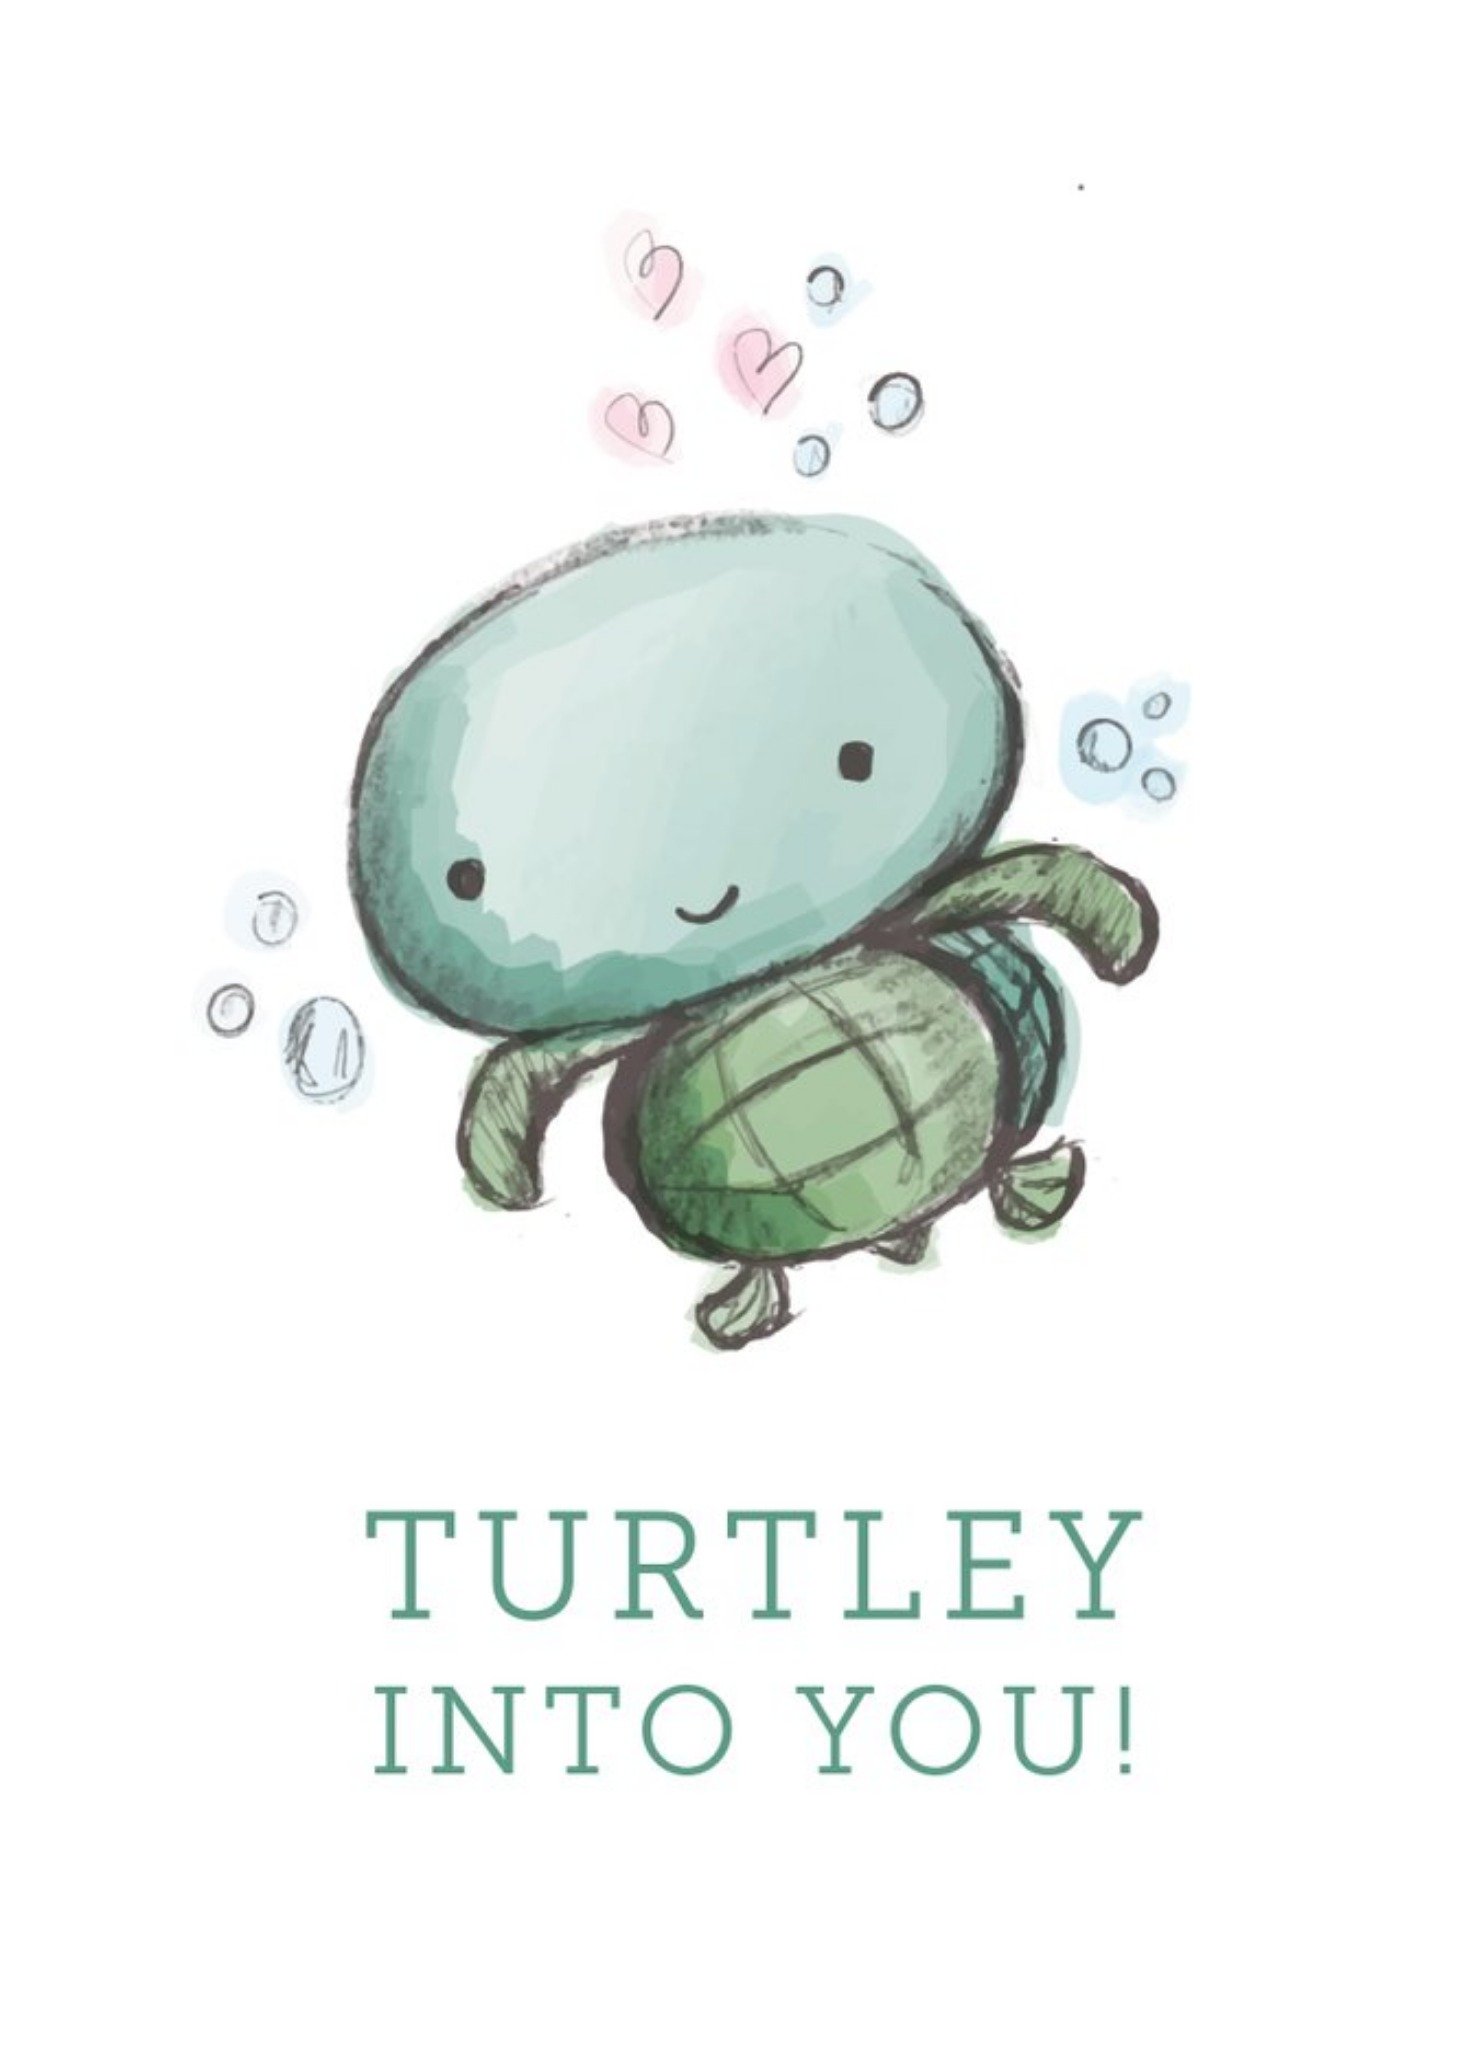 Moonpig Illustration Of A Cute Turtle Valentine's Day Card, Large